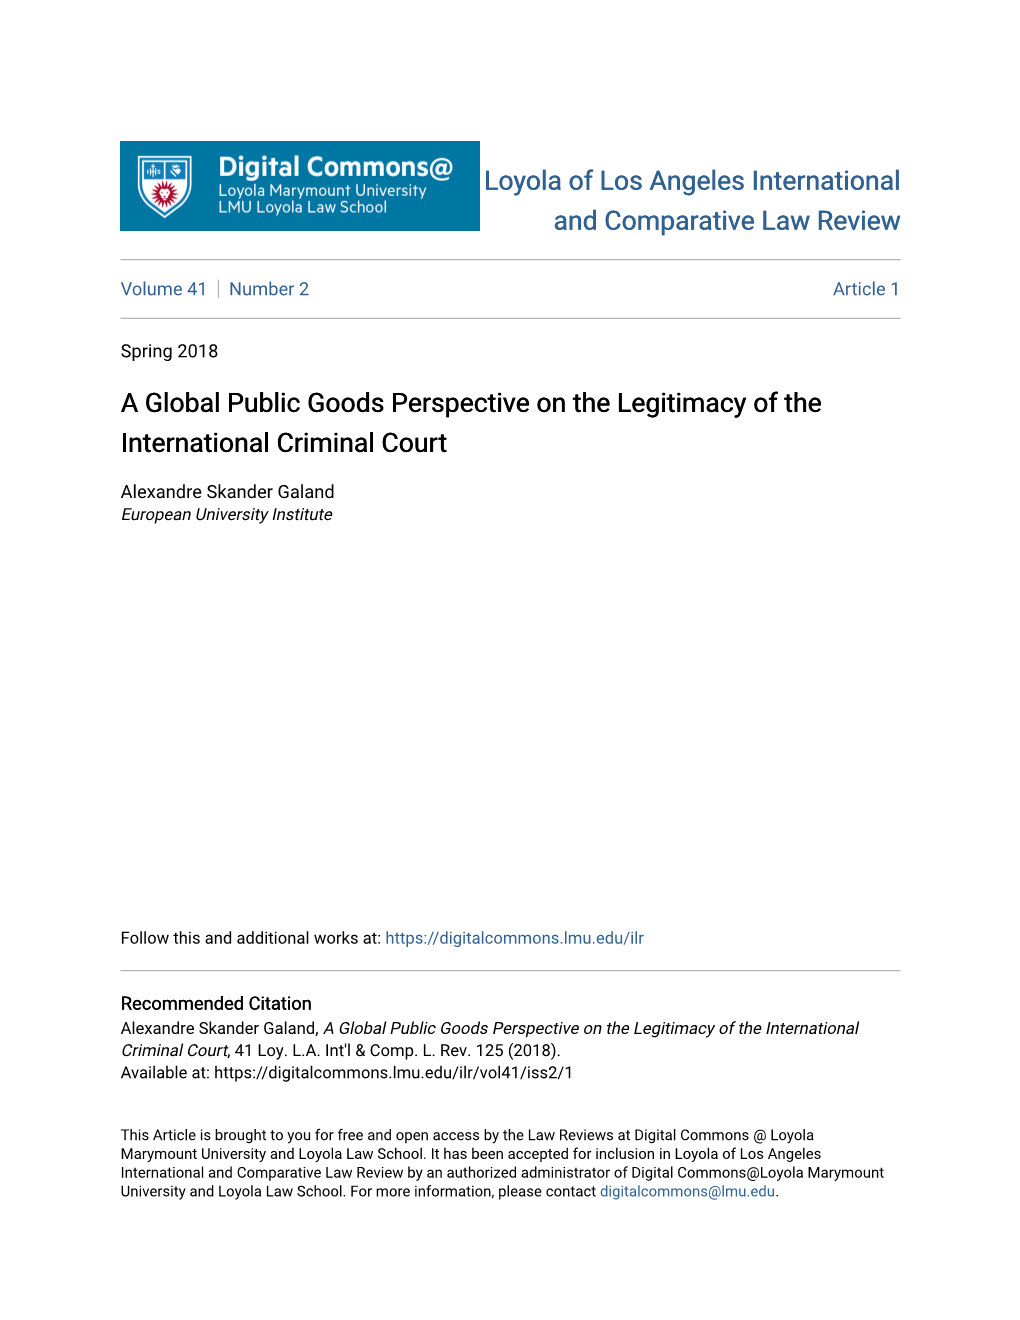 A Global Public Goods Perspective on the Legitimacy of the International Criminal Court